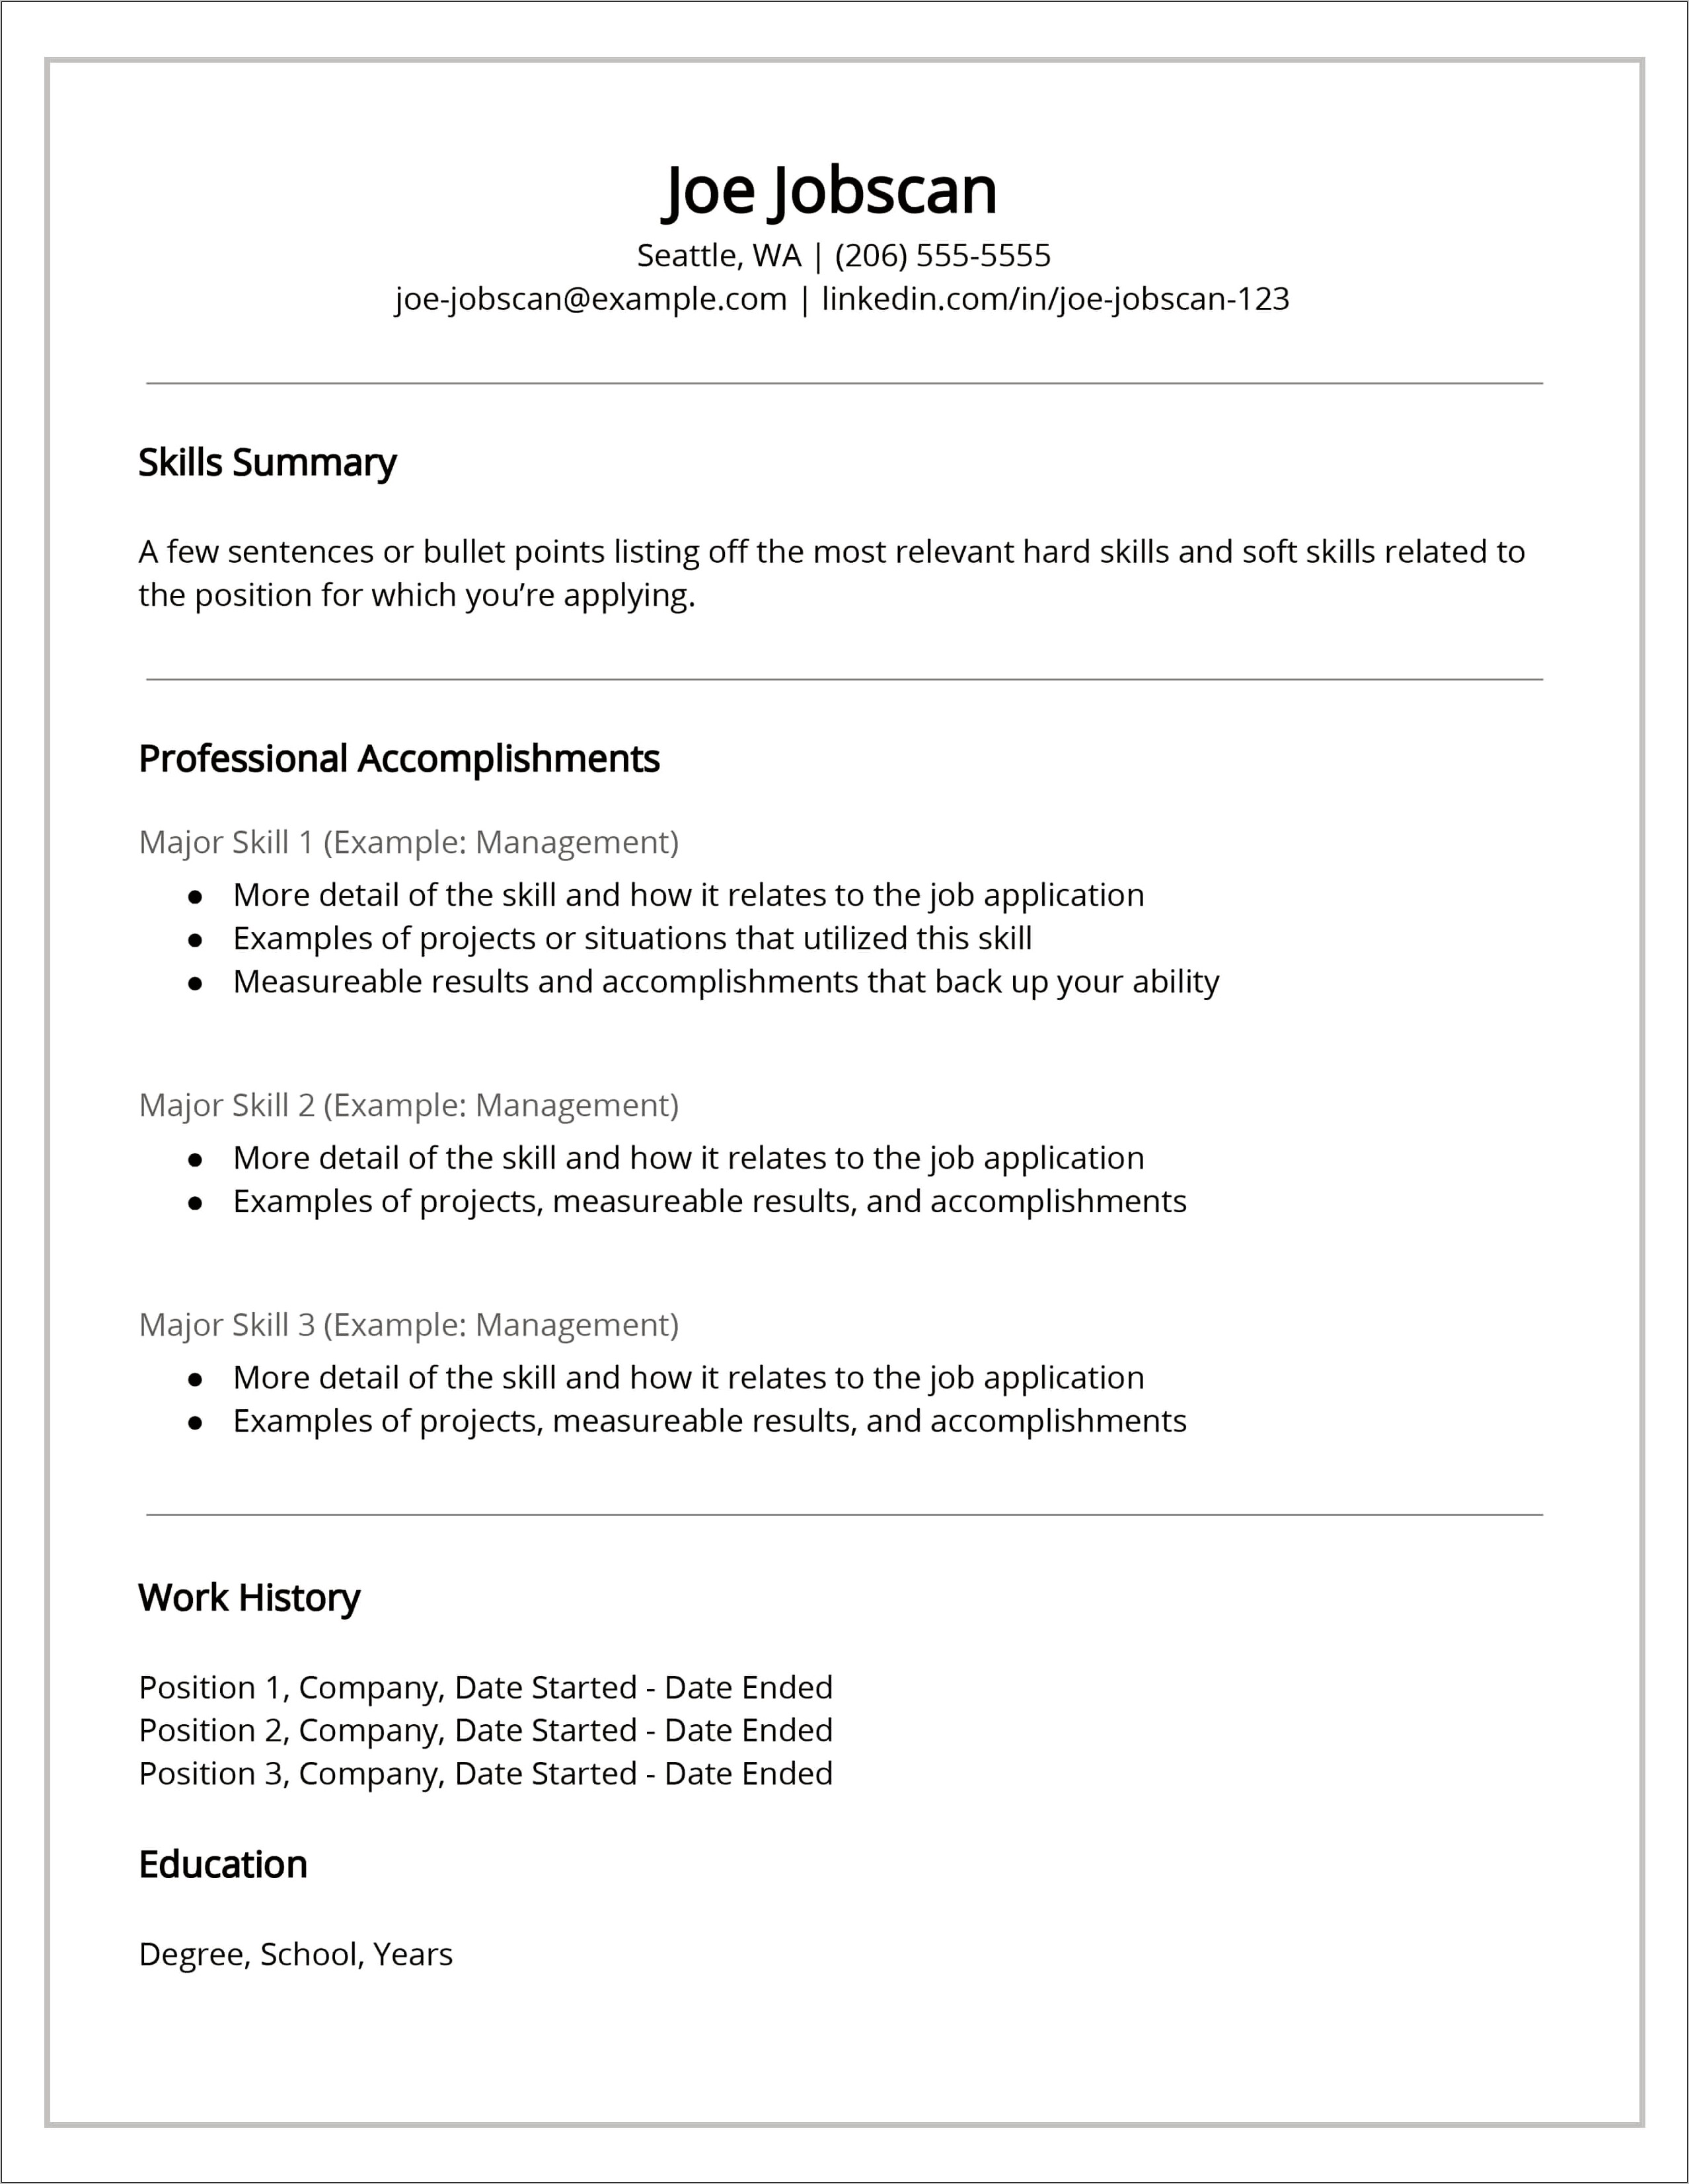 Resume Templates That Stand Out For Professional Jobs